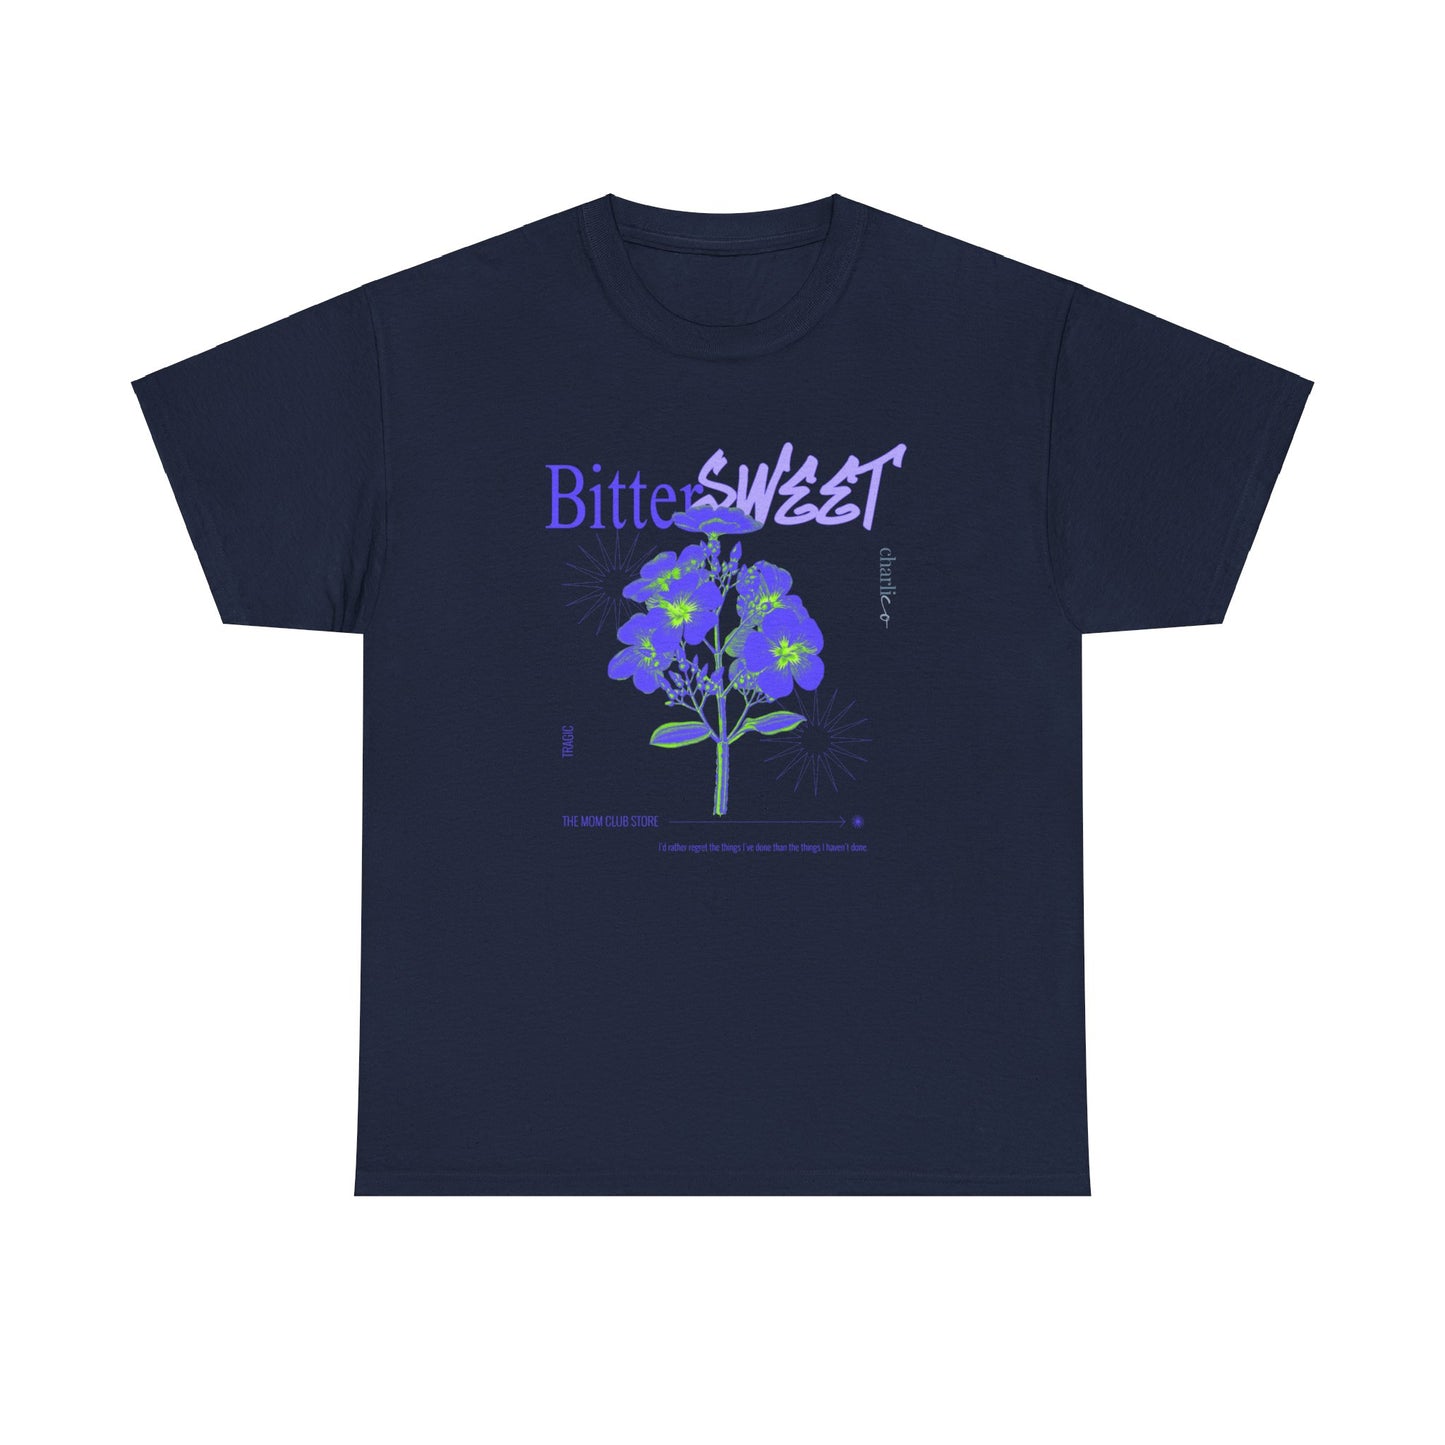 Short-sleeved t-shirt with unisex print -BITTER SWEET- for adults